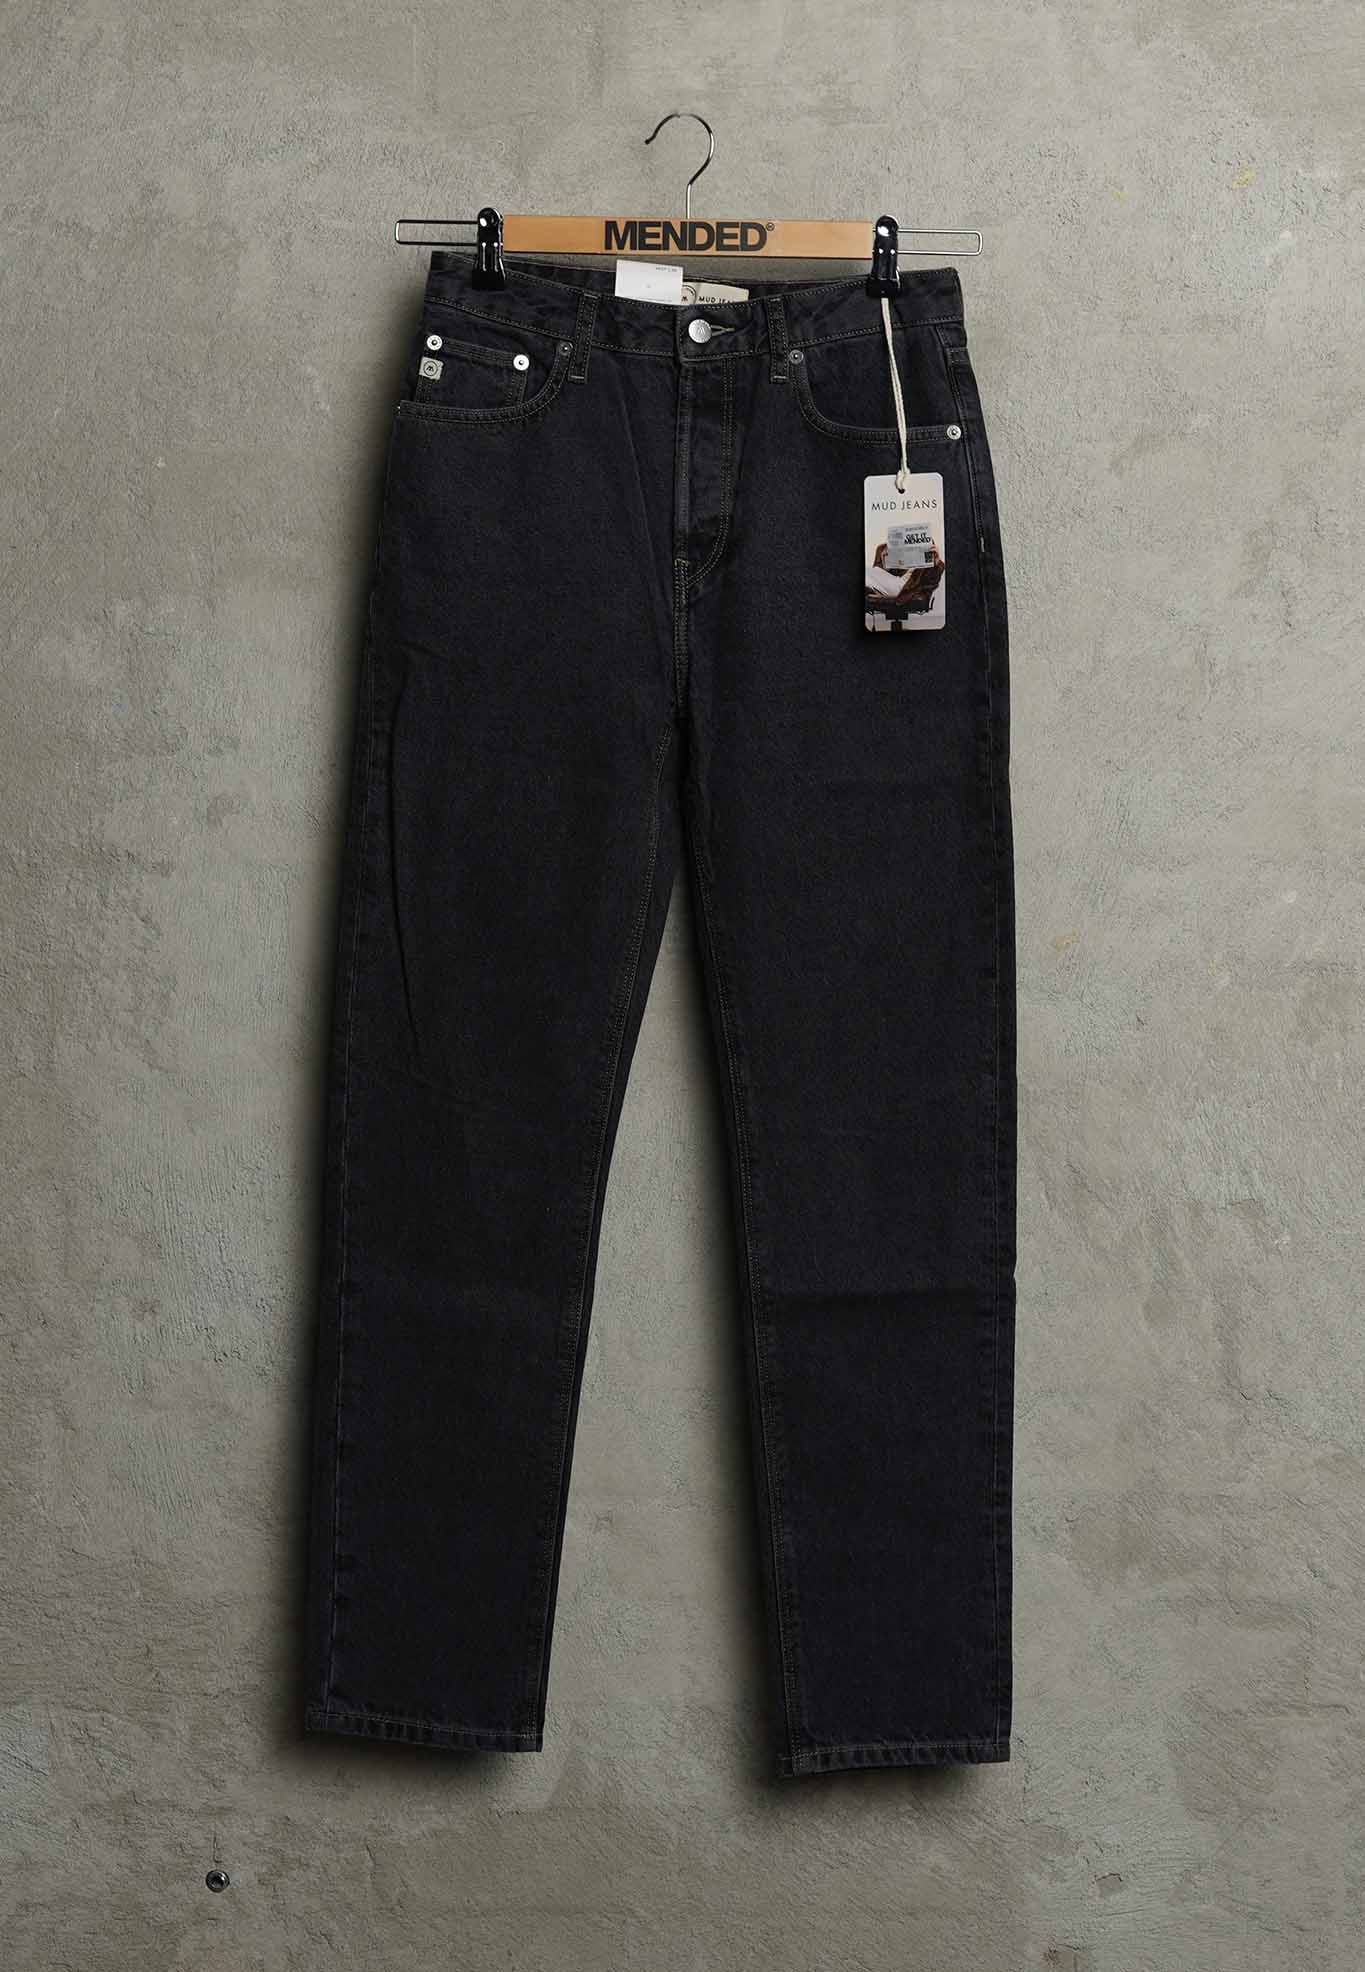 Women - MUD Jeans - Piper Straight - Used Black